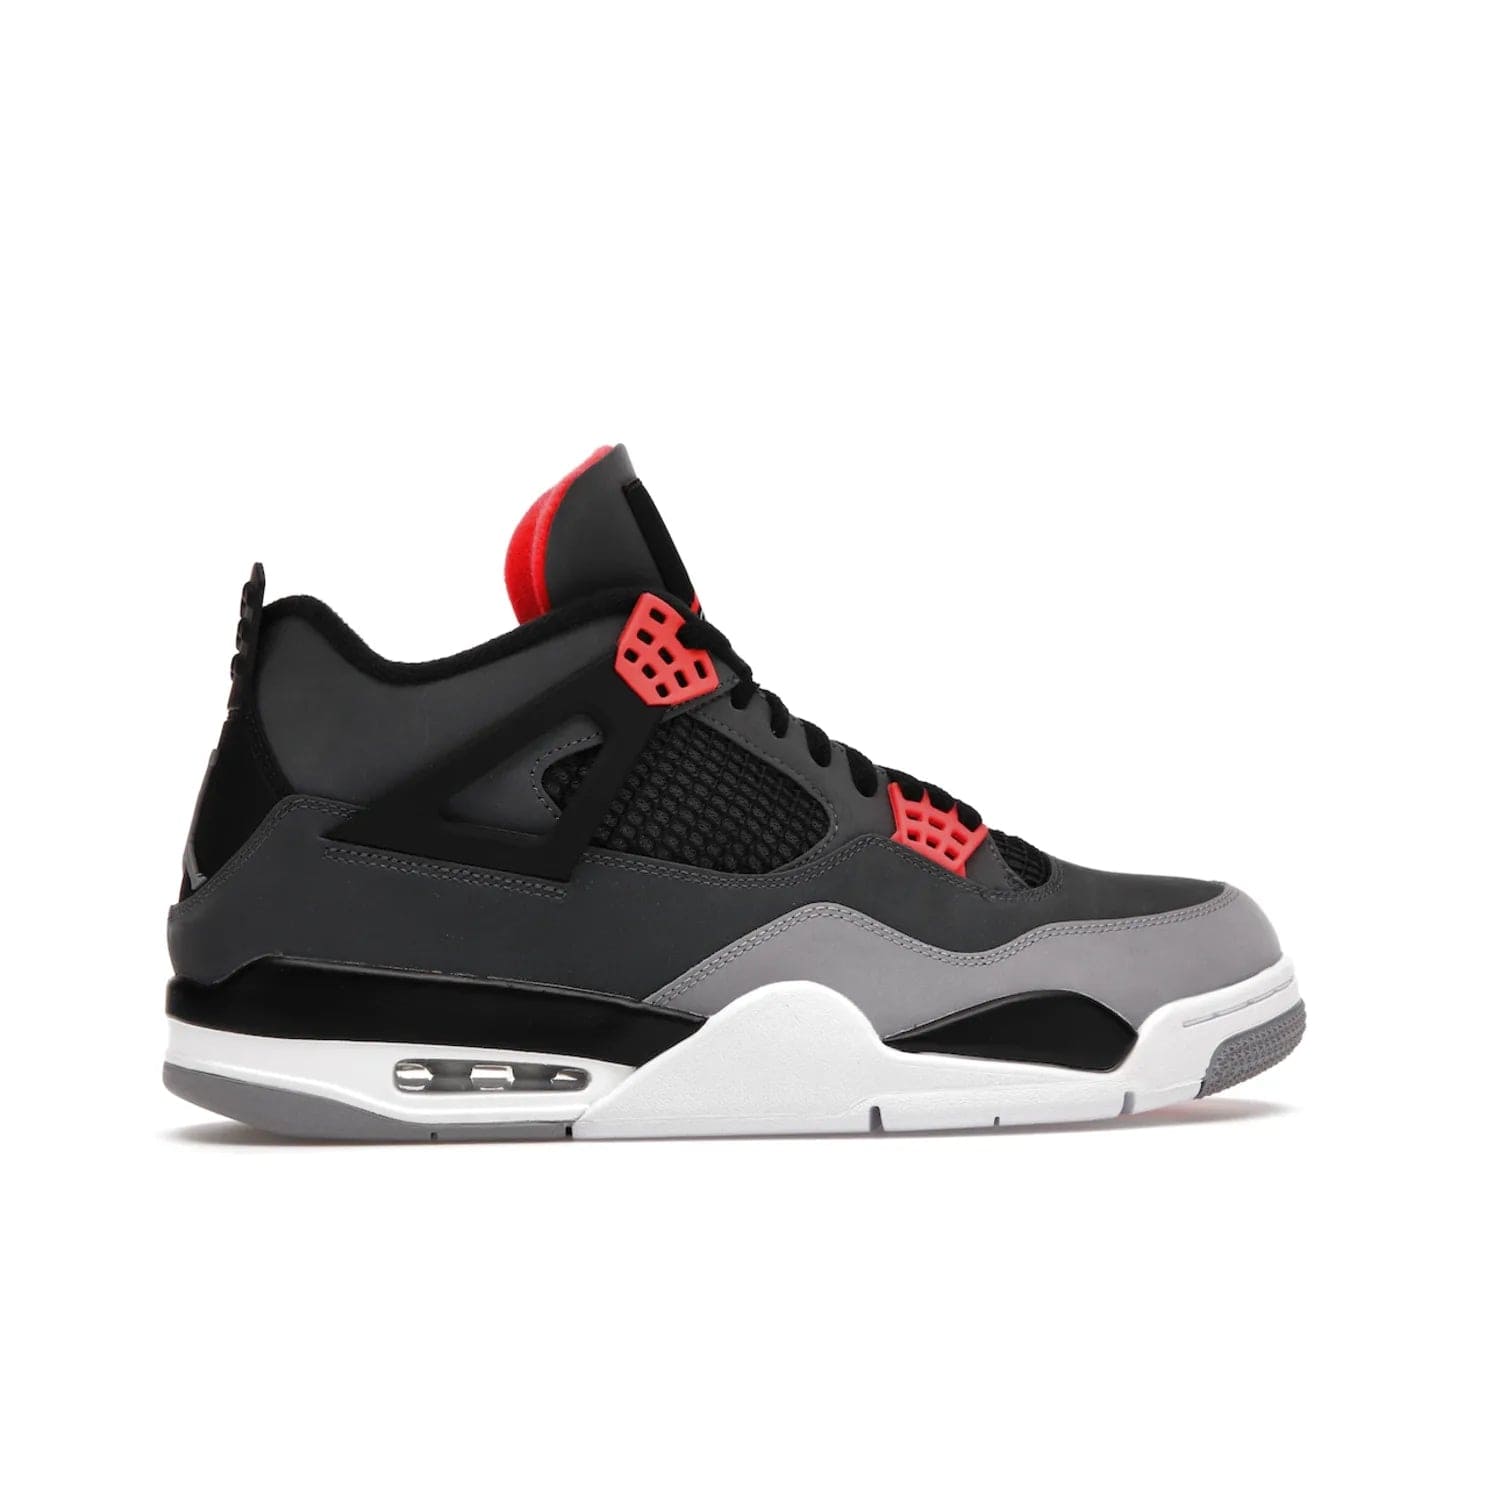 Jordan 4 Retro Infrared - Image 36 - Only at www.BallersClubKickz.com - Introducing the classic & timeless Air Jordan 4 Infrared. Durabuck upper, TPU mesh inserts, tech straps & heel tabs in dark grey and infrared accents. White sole with visible Air units. Out June 15, 2022. Get your pair now!